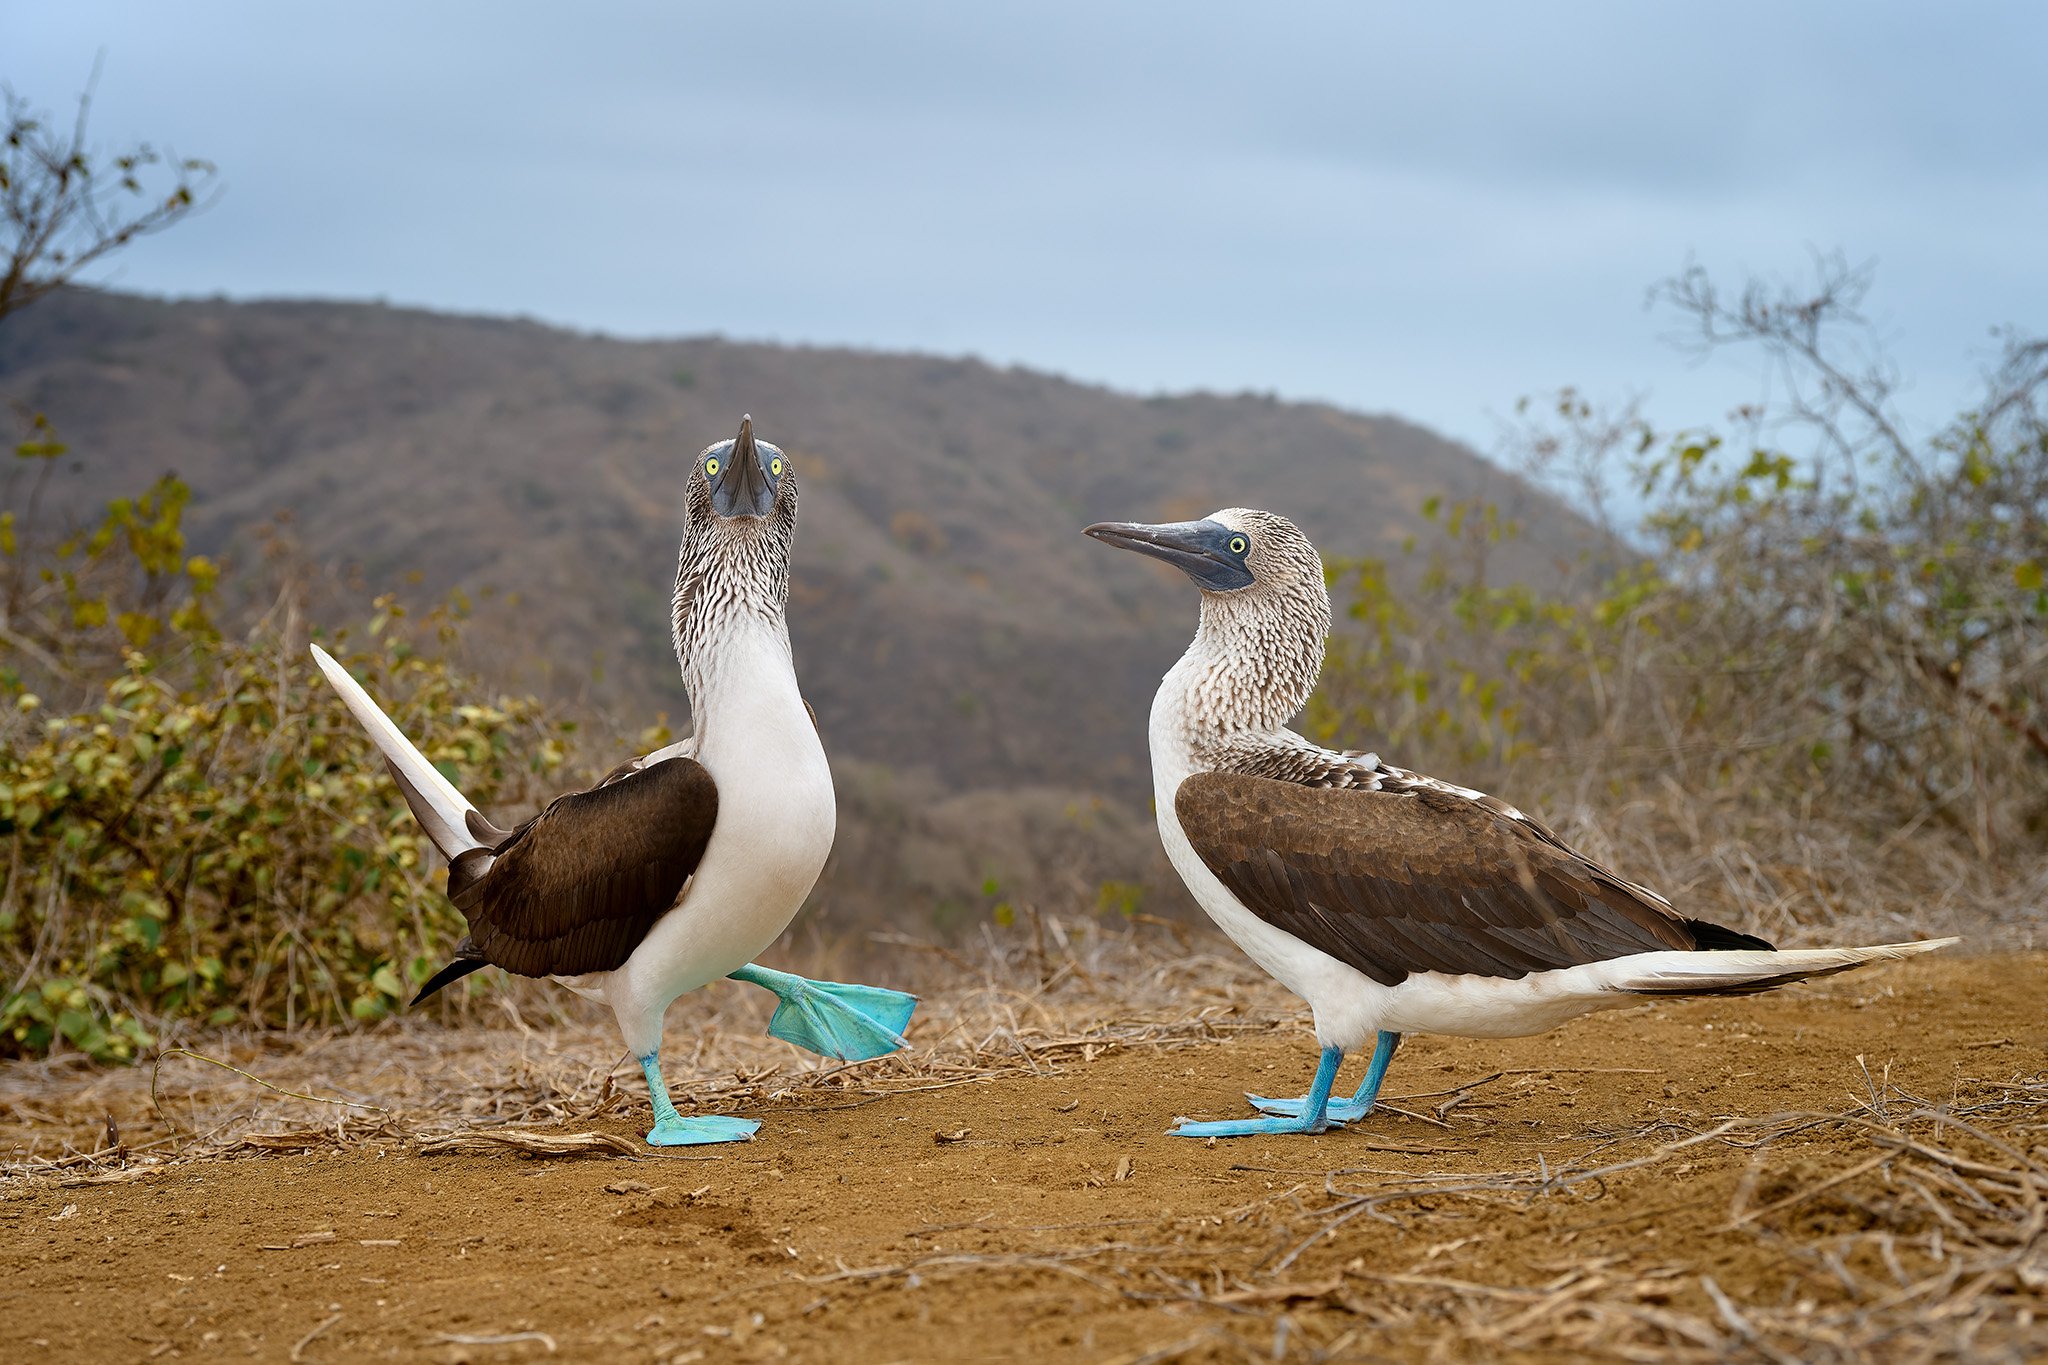 https://photographylife.com/cdn-cgi/imagedelivery/GrQZt6ZFhE4jsKqjDEtqRA/photographylife.com/2022/09/Blue-footed-Booby-Wide-Angle_01.jpg/w=2048